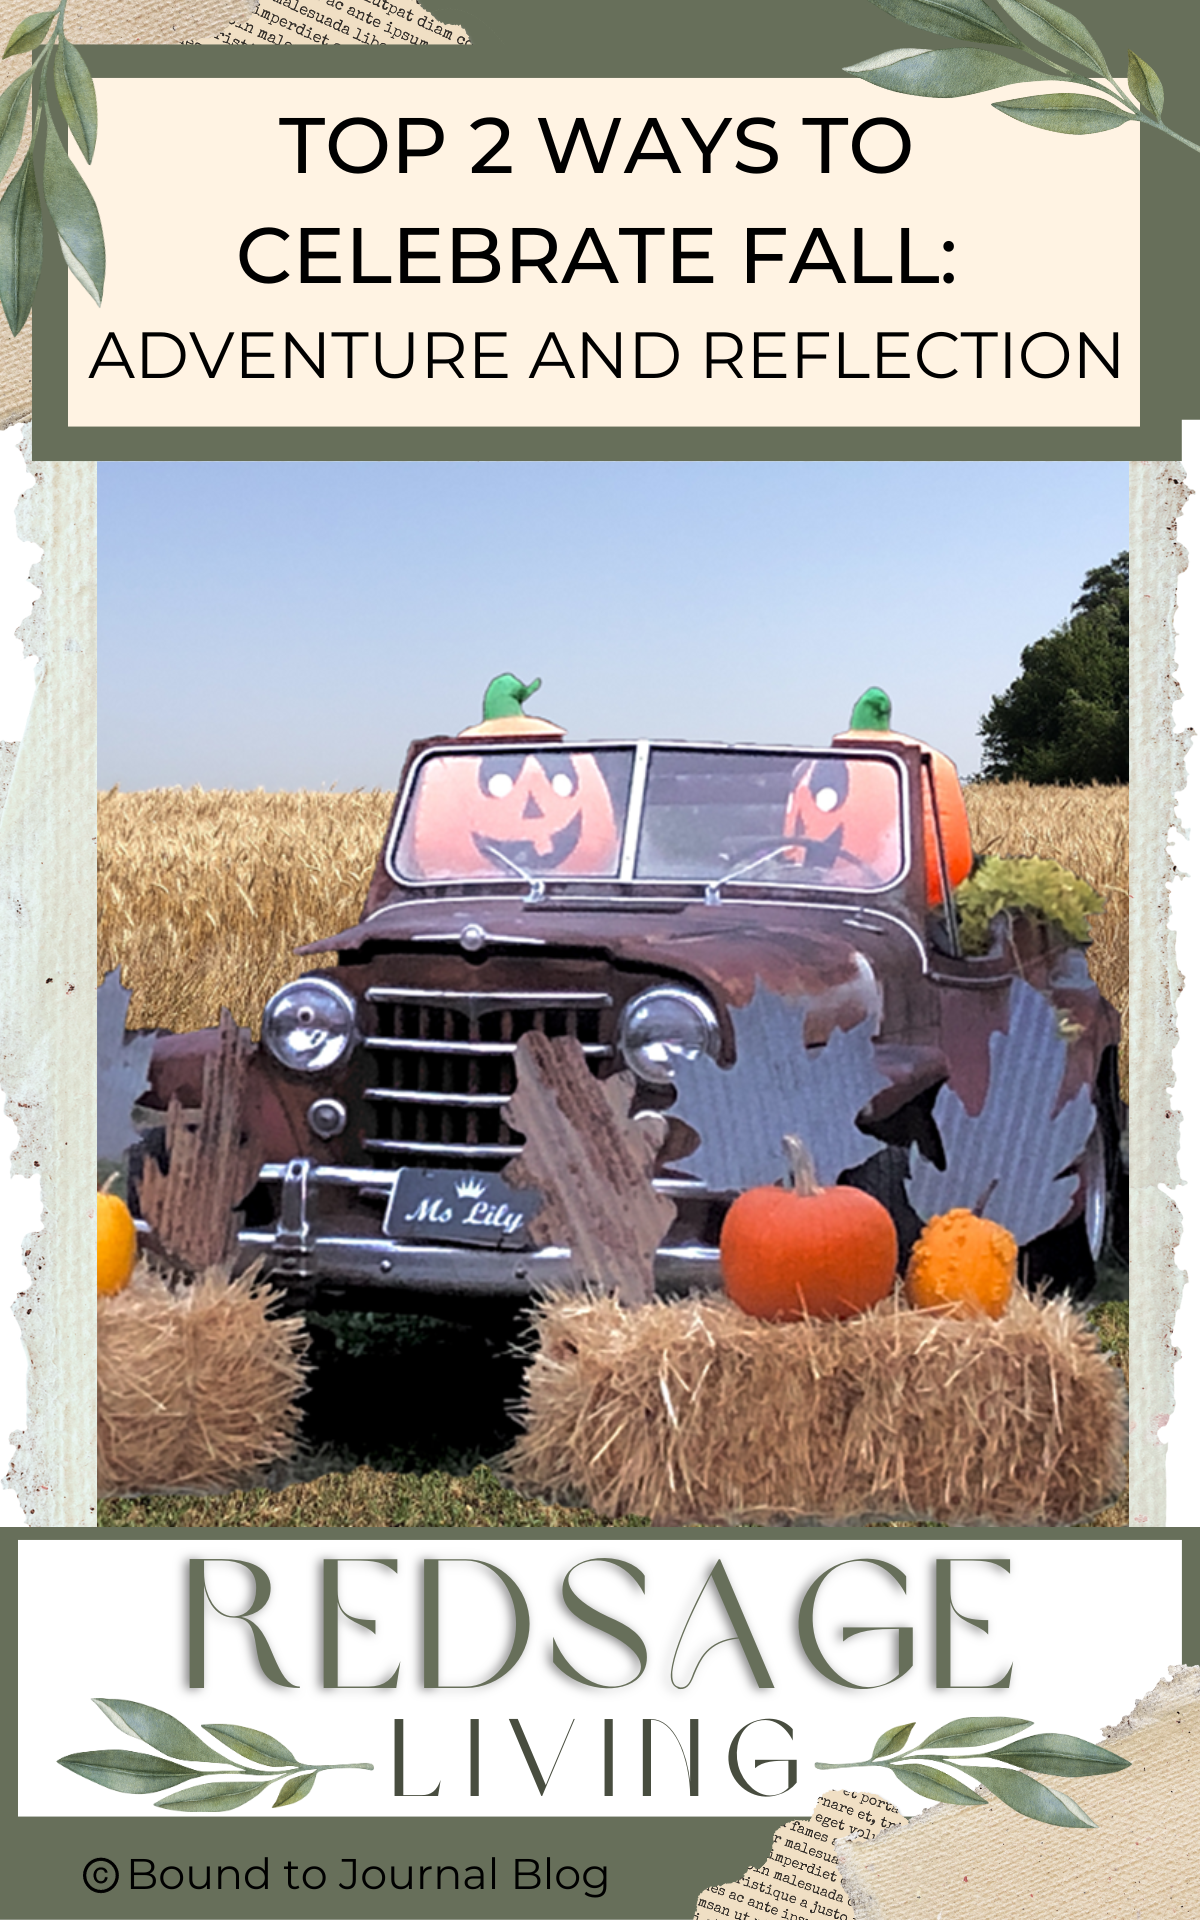 Old car with two pumpking characters riding, pumpkins, haybails, and corn field image for post Top 2 Ways to Celebrate Fall: Adventure and Reflection vertical